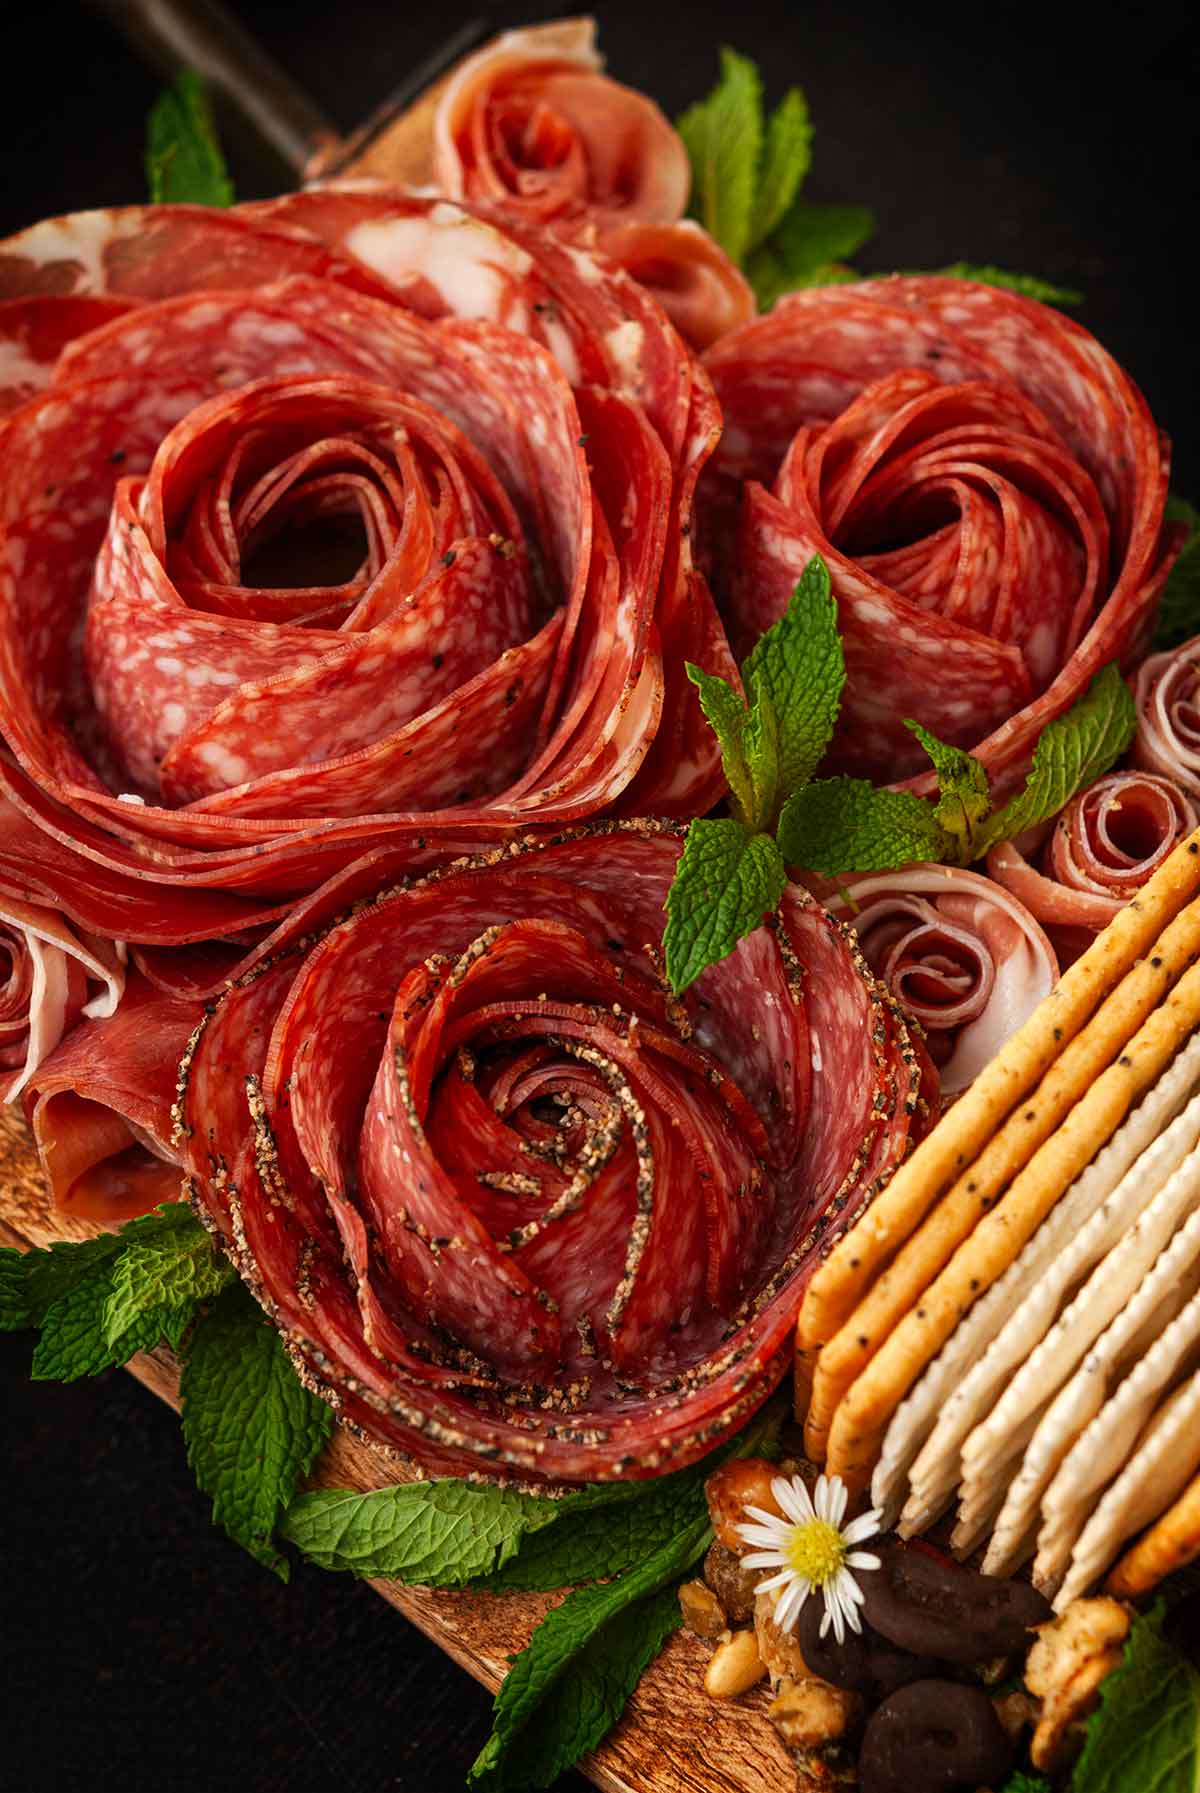 Meat roses on the end of a cheese board with mint and crackers.